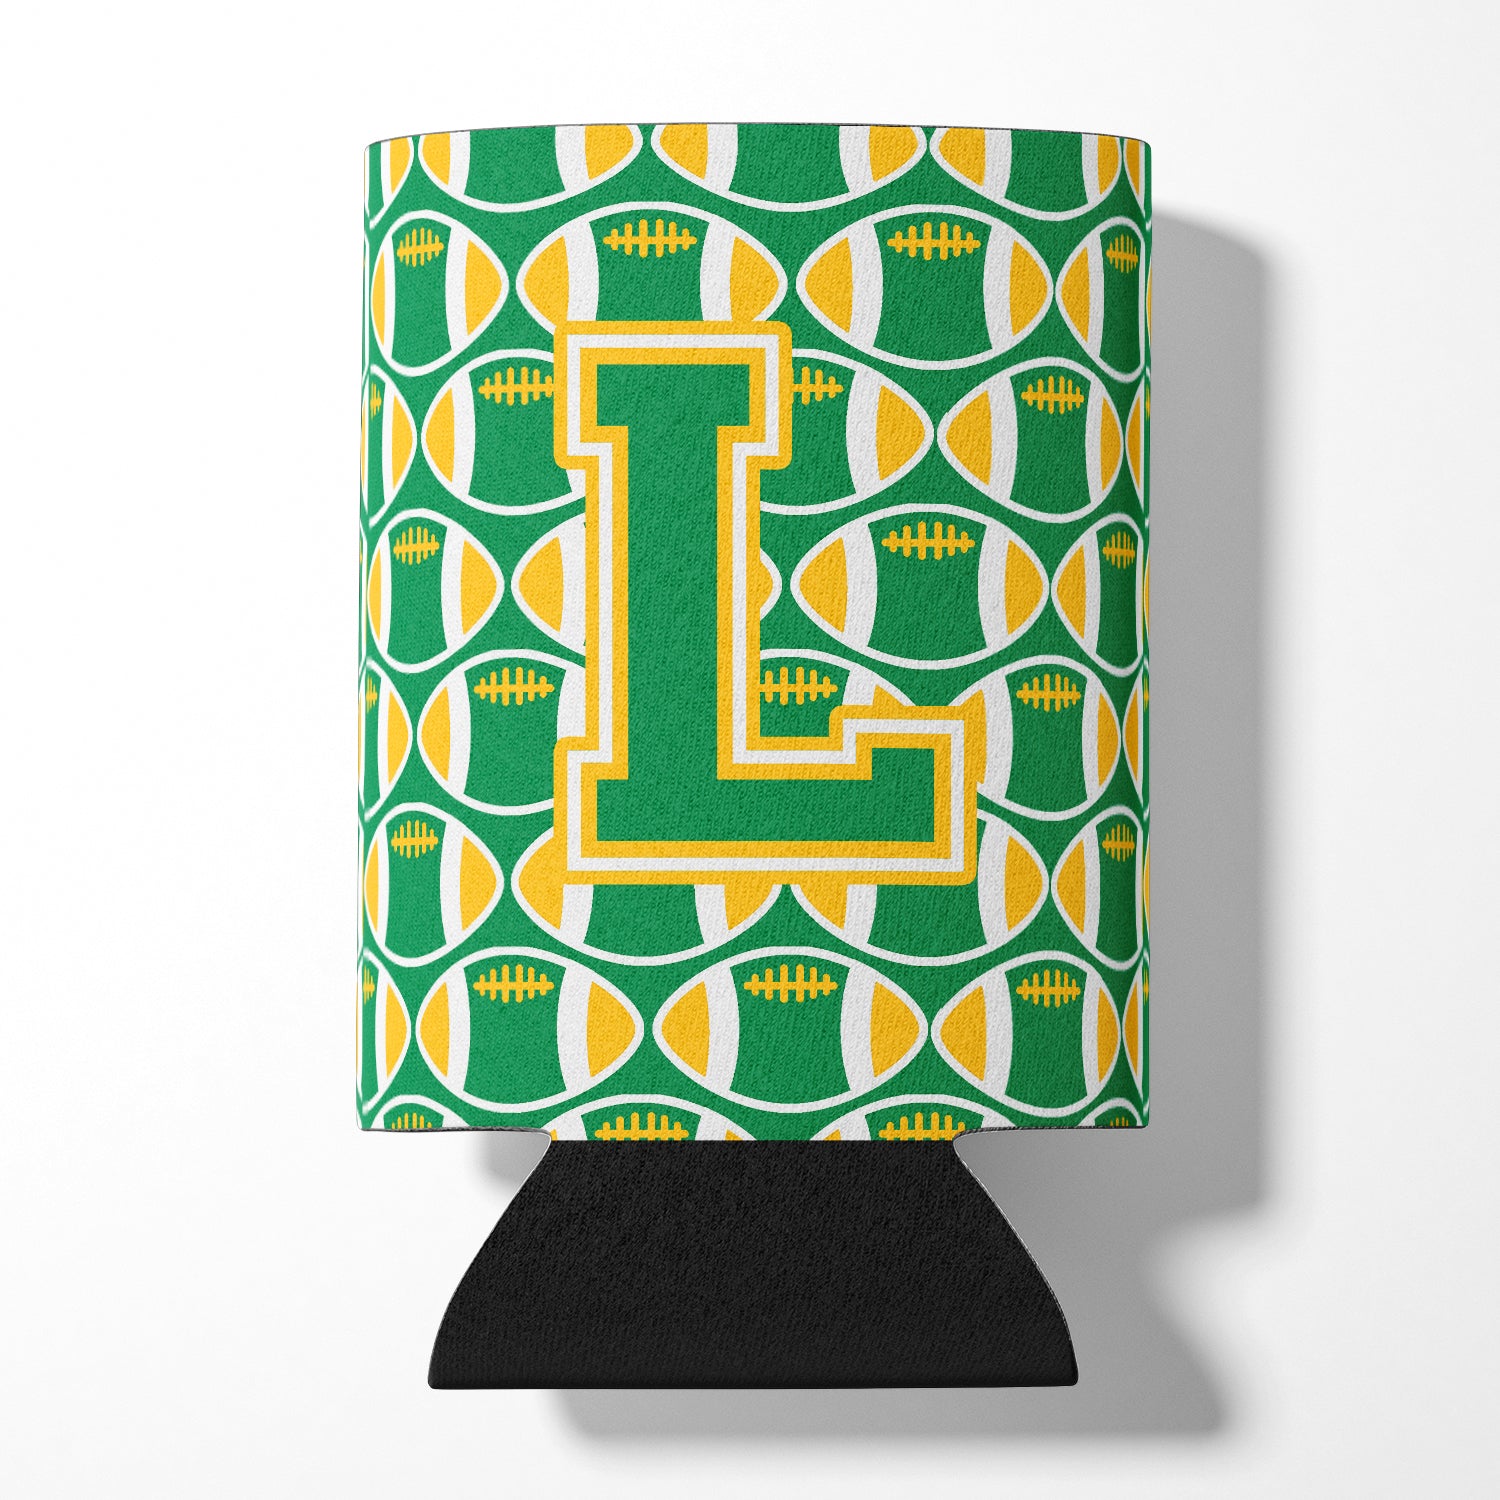 Letter L Football Green and Gold Can or Bottle Hugger CJ1069-LCC